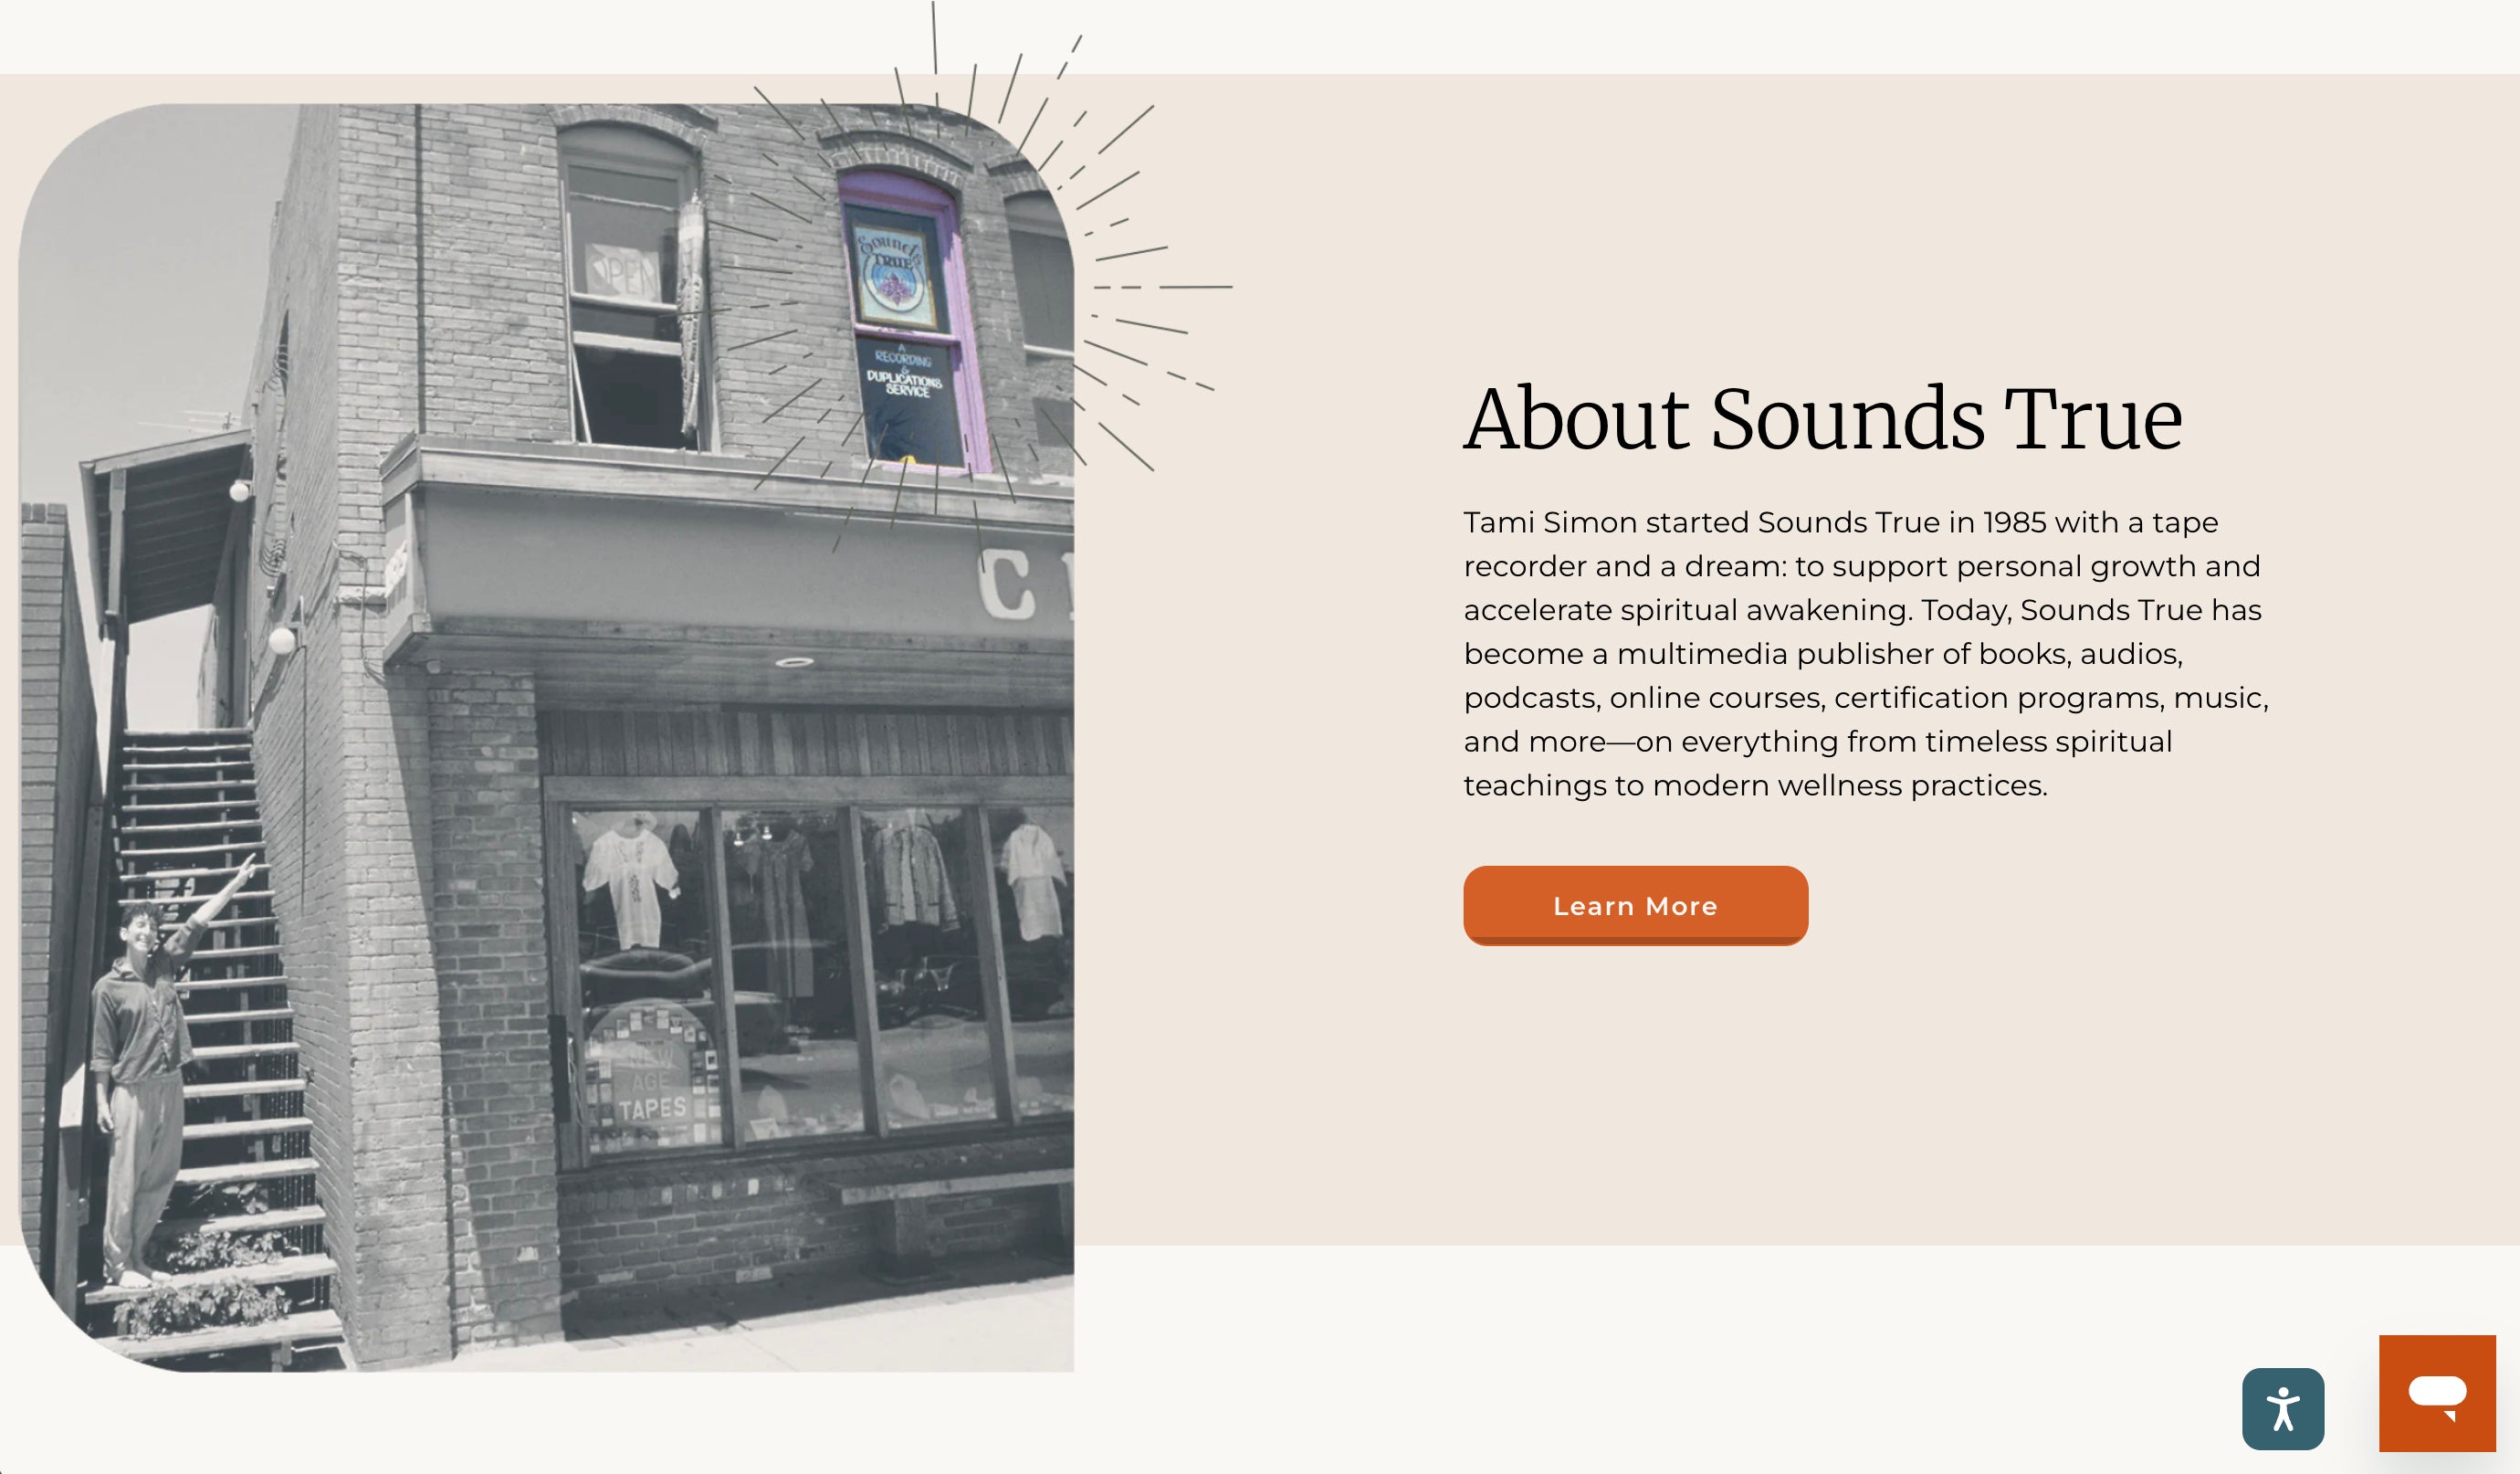 Screen grab of about page for Sounds True bookstore